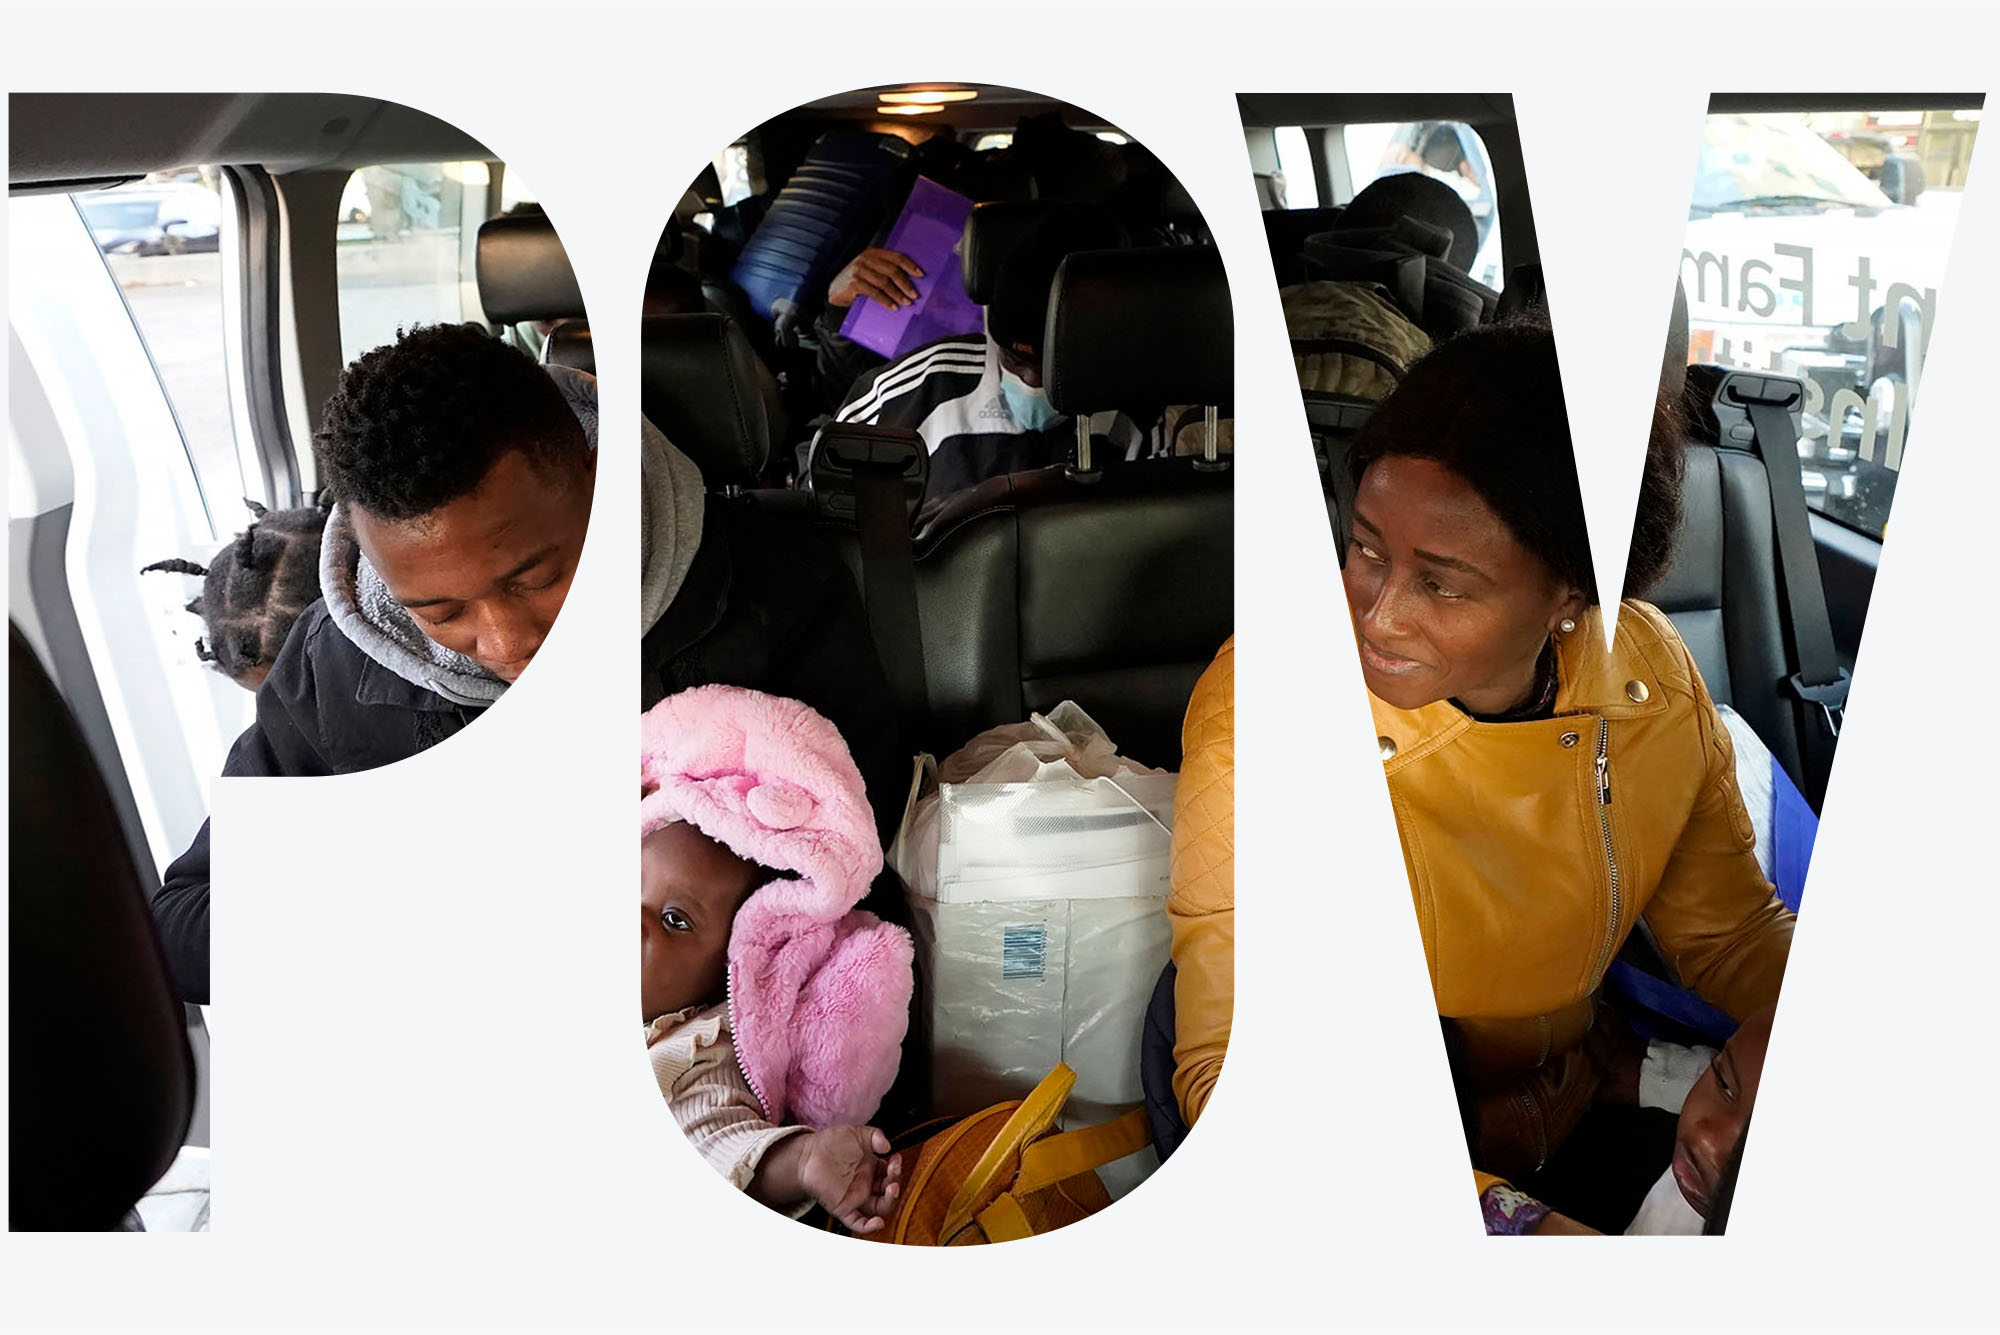 Photo with text overlay reading "POV": A family of immigrants in a car full of luggage in Boston, MA, heading for a shelter in Quincy MA